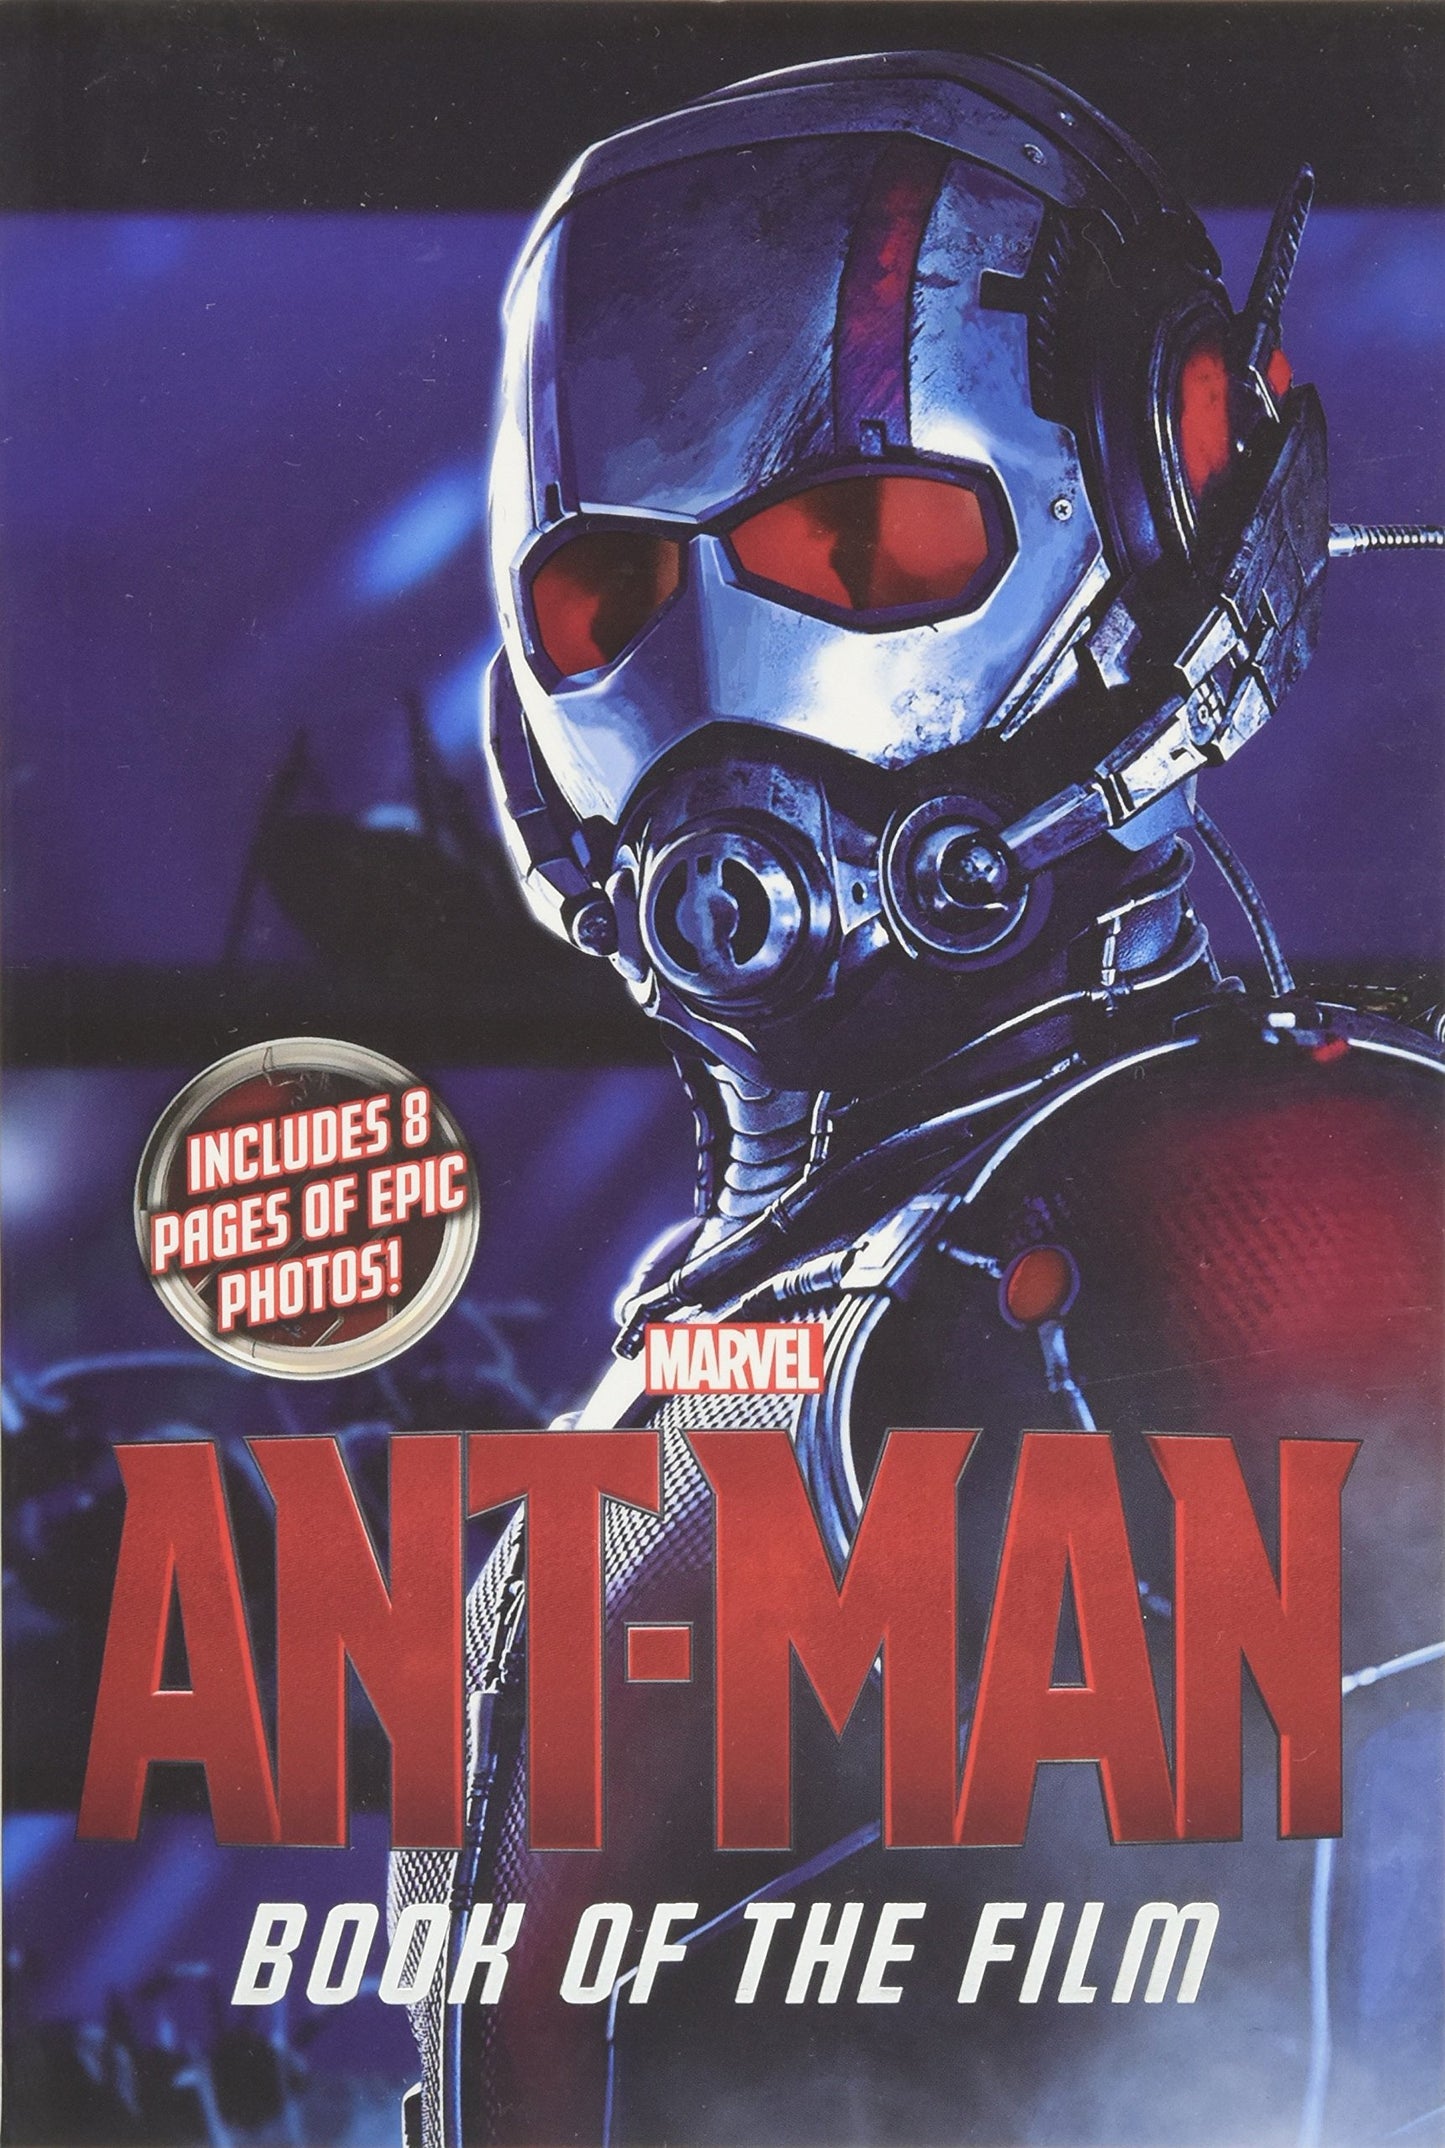 Marvel Ant-Man Book of the Film